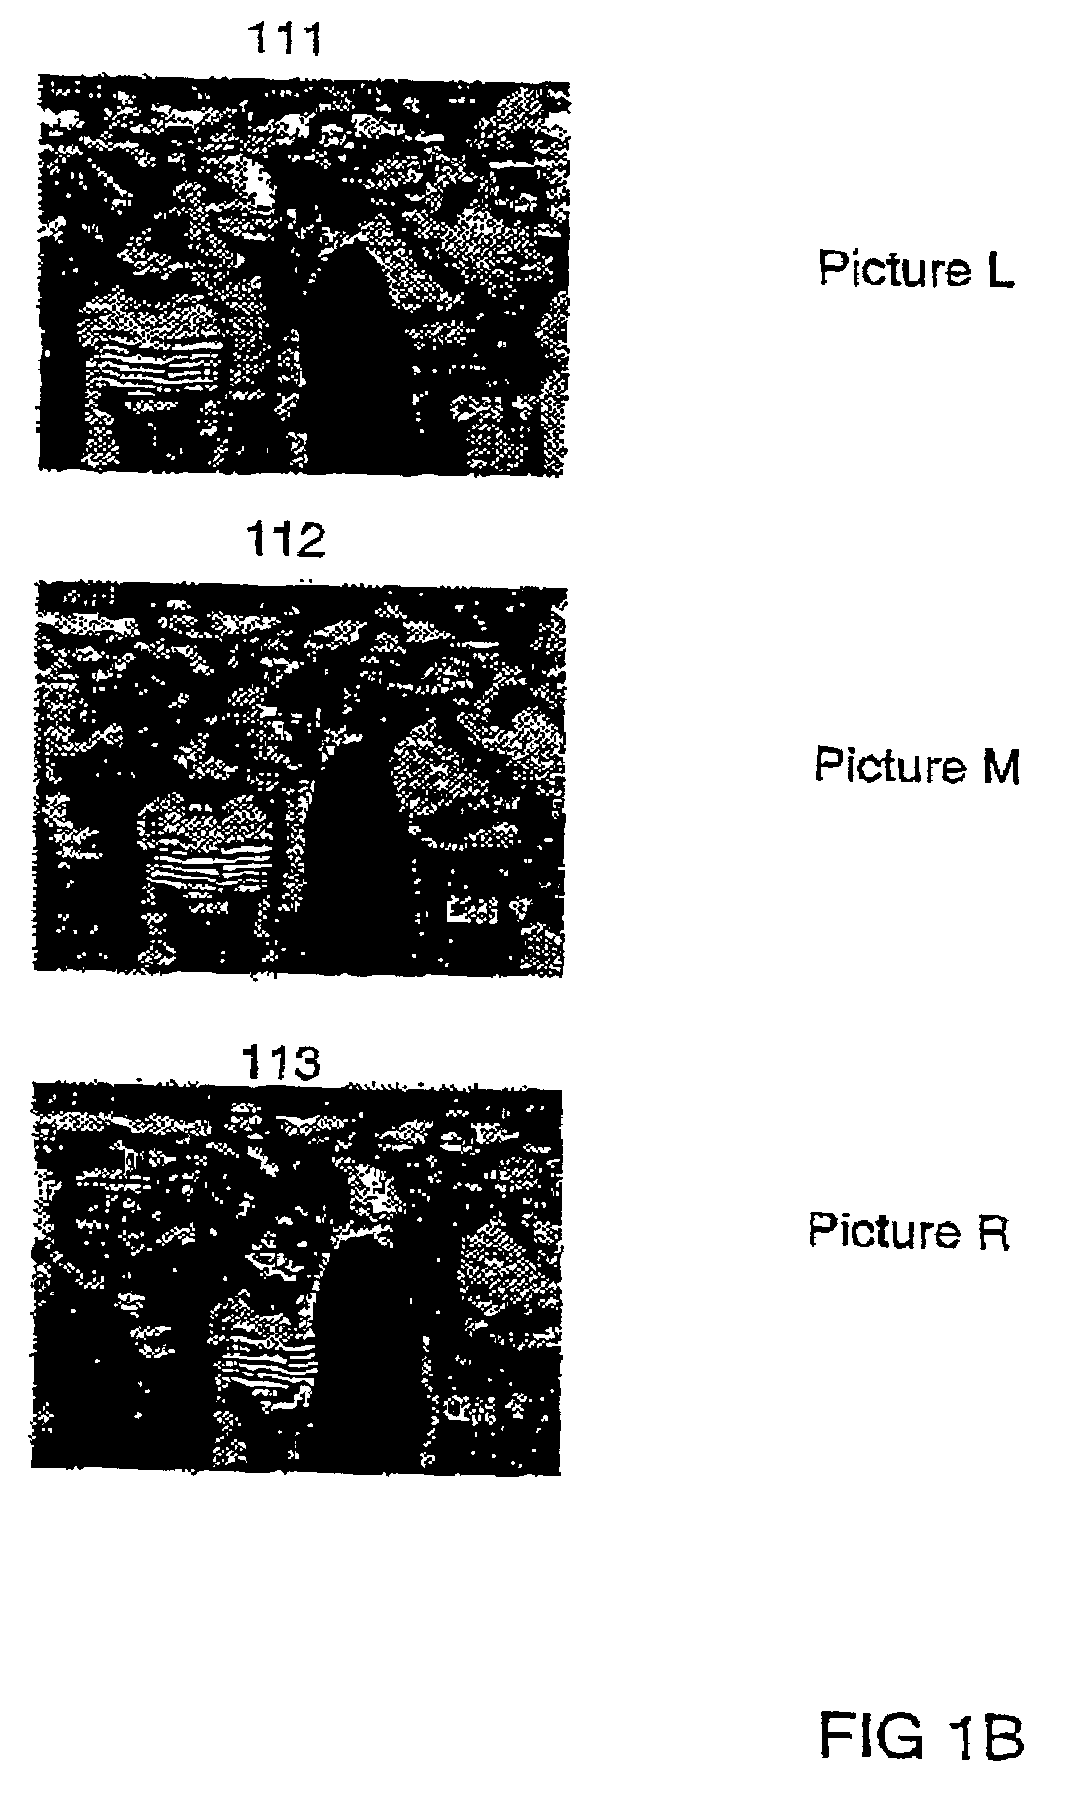 Method of selecting key-frames from a video sequence